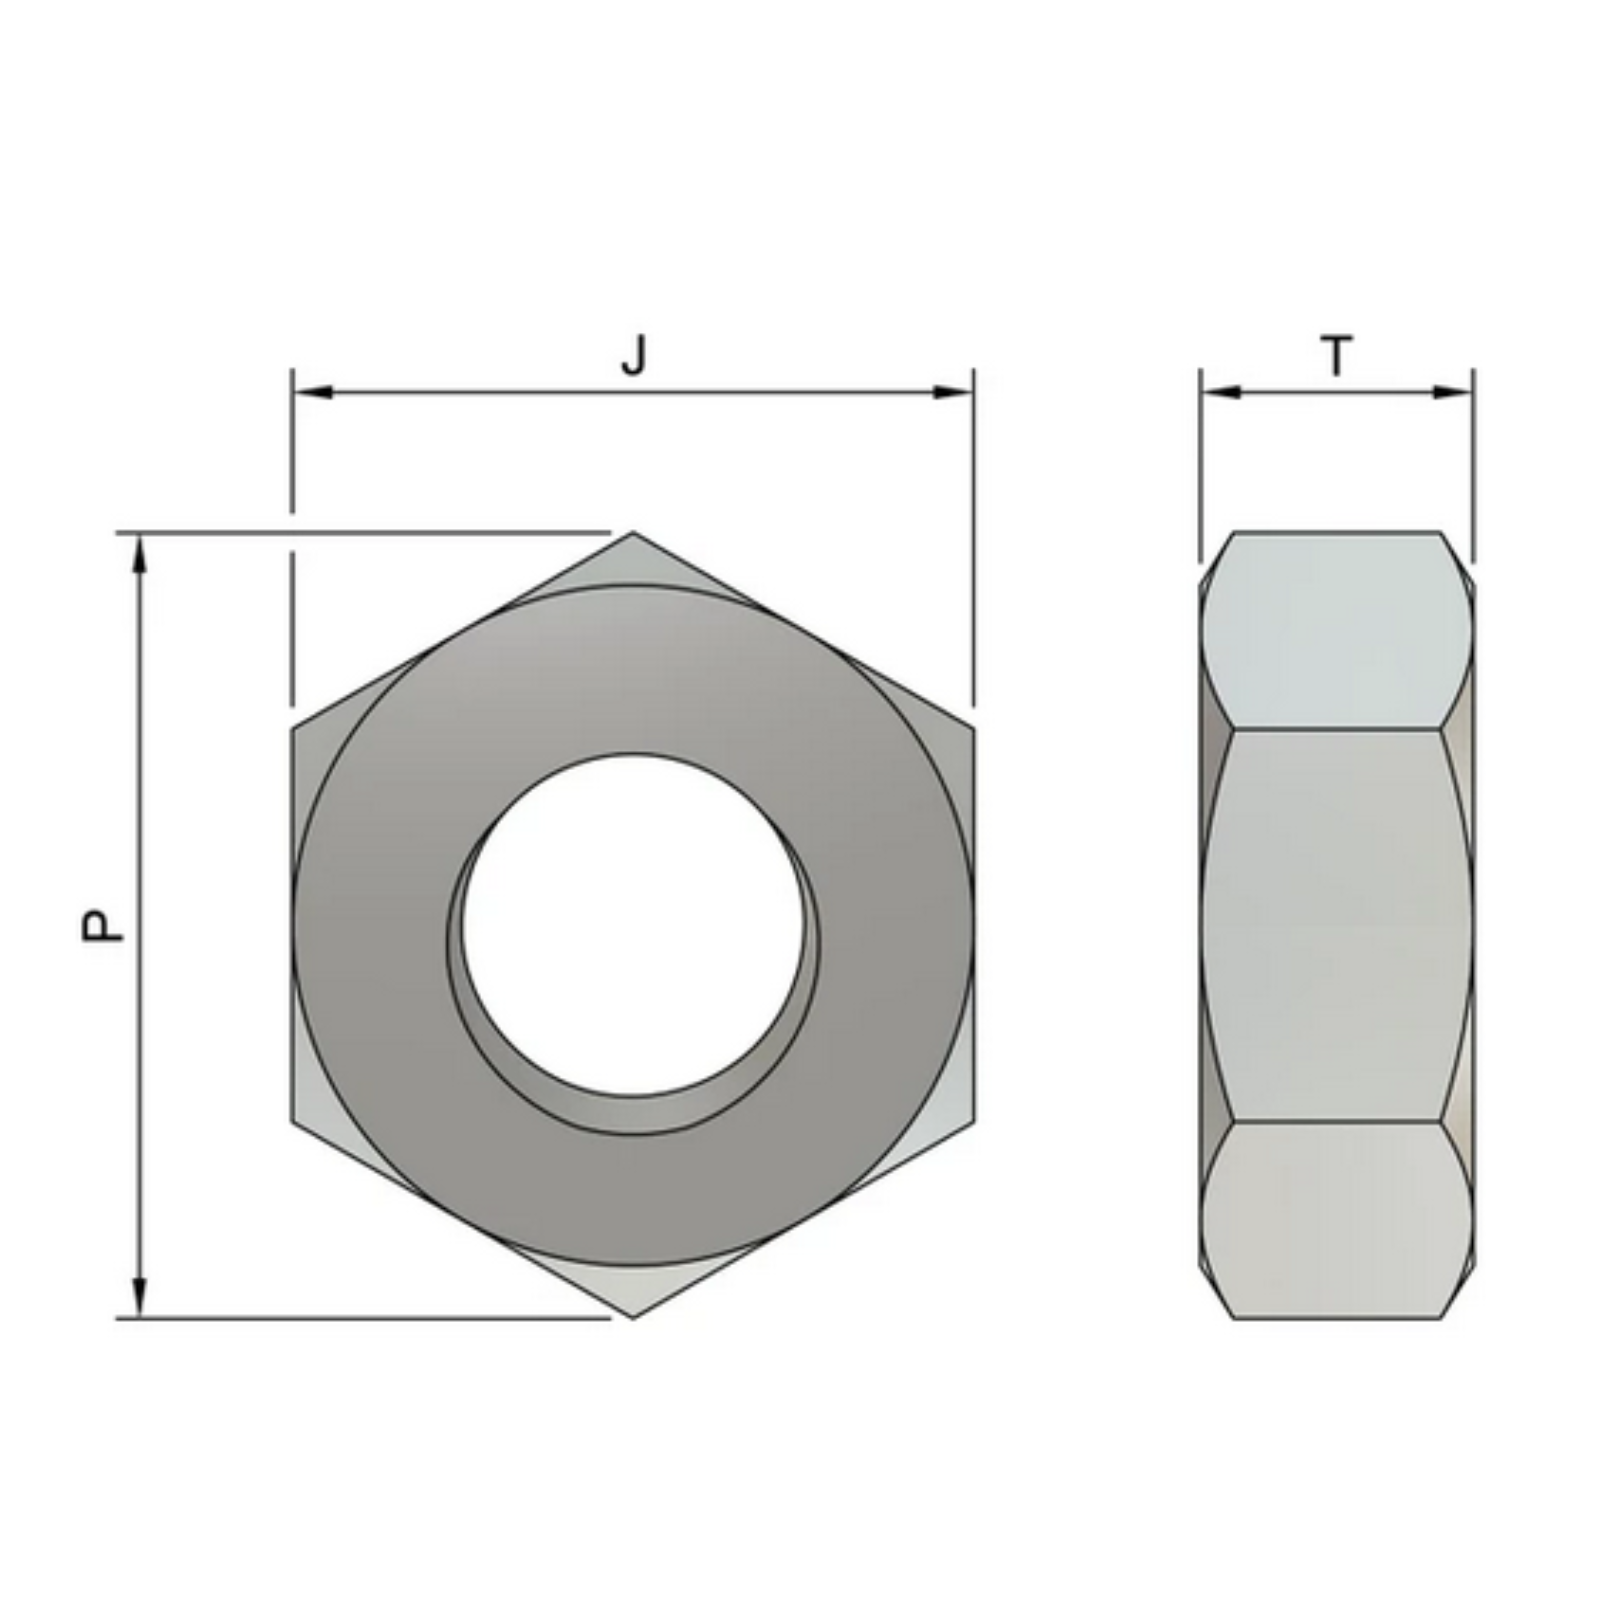 M3 Hexagon Nuts (DIN 934) - Stainless Steel (A4)